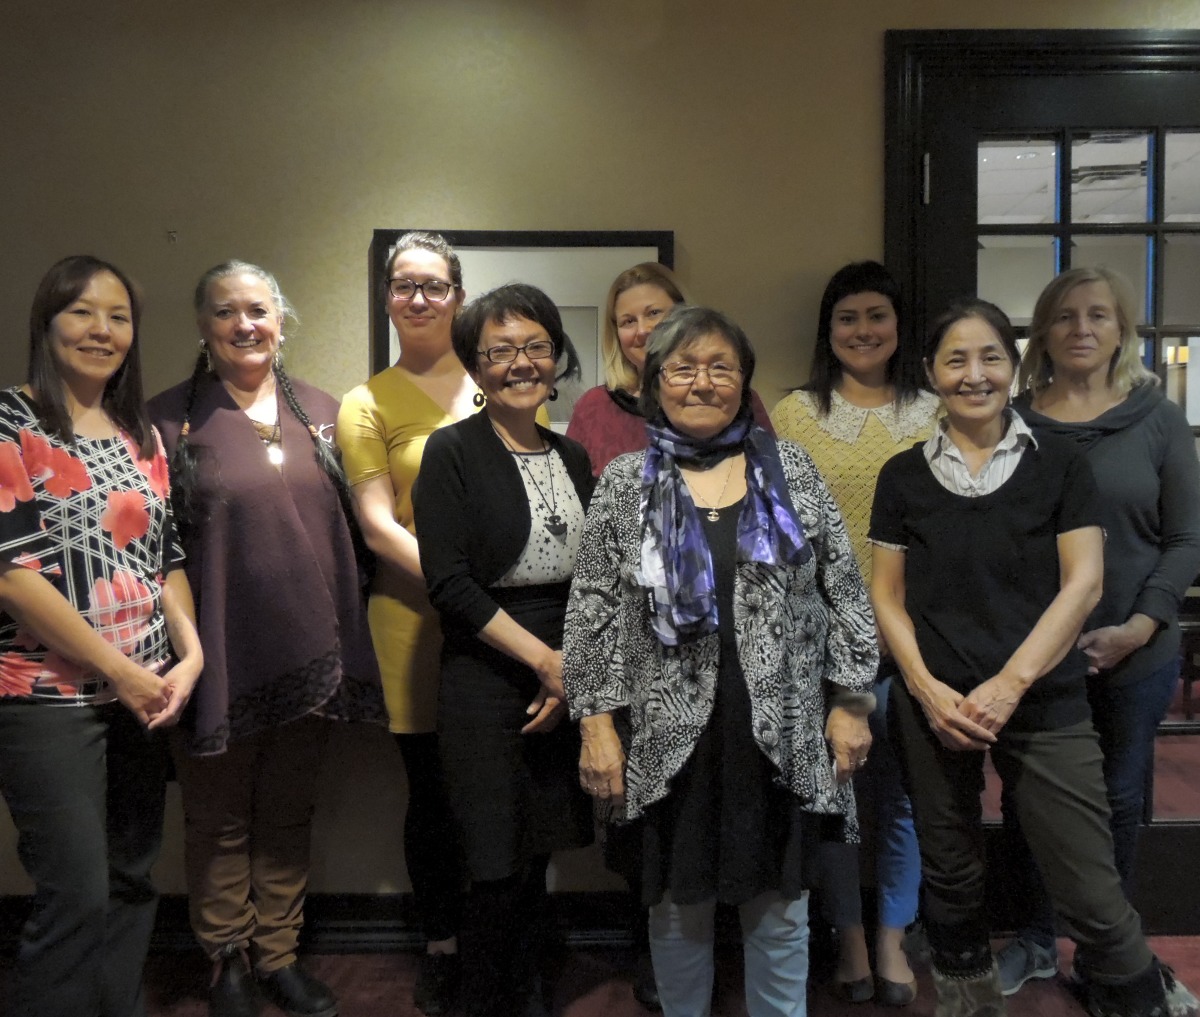 My experience participating in the valuable work of the Inuit Cancer Project